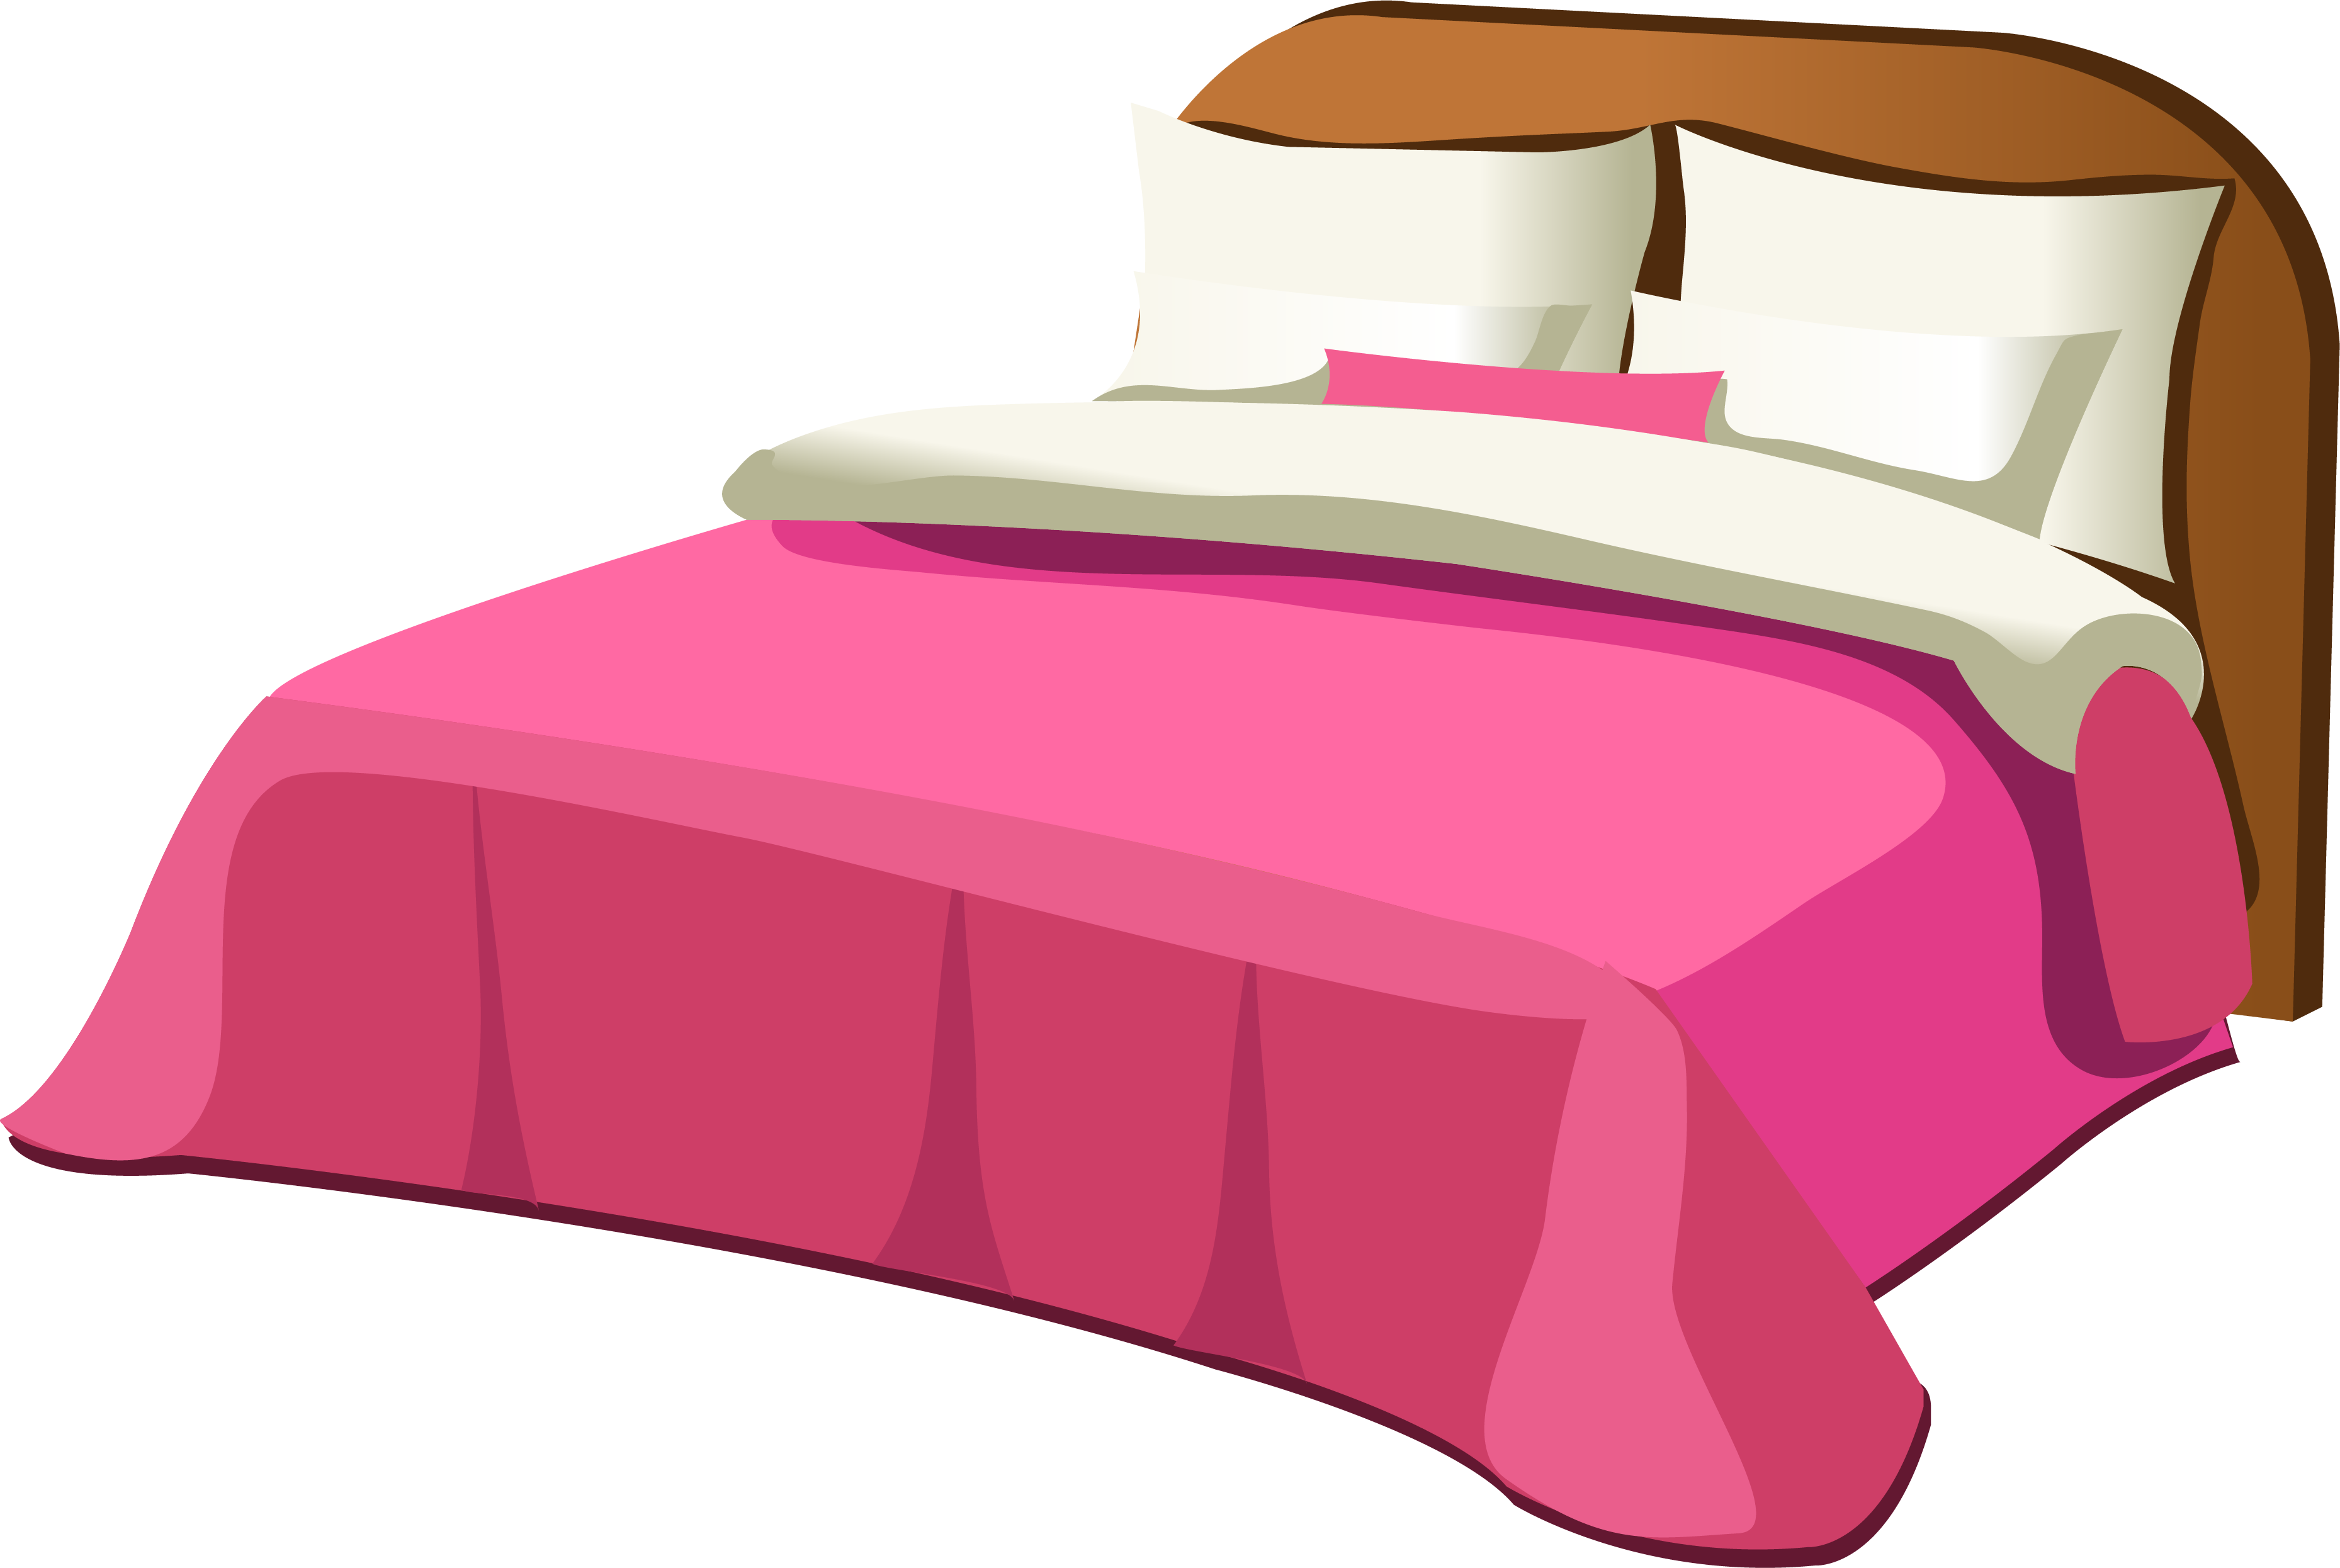 Bed Furniture Pillow - bed png download - 3717*2491 - Free Transparent ...